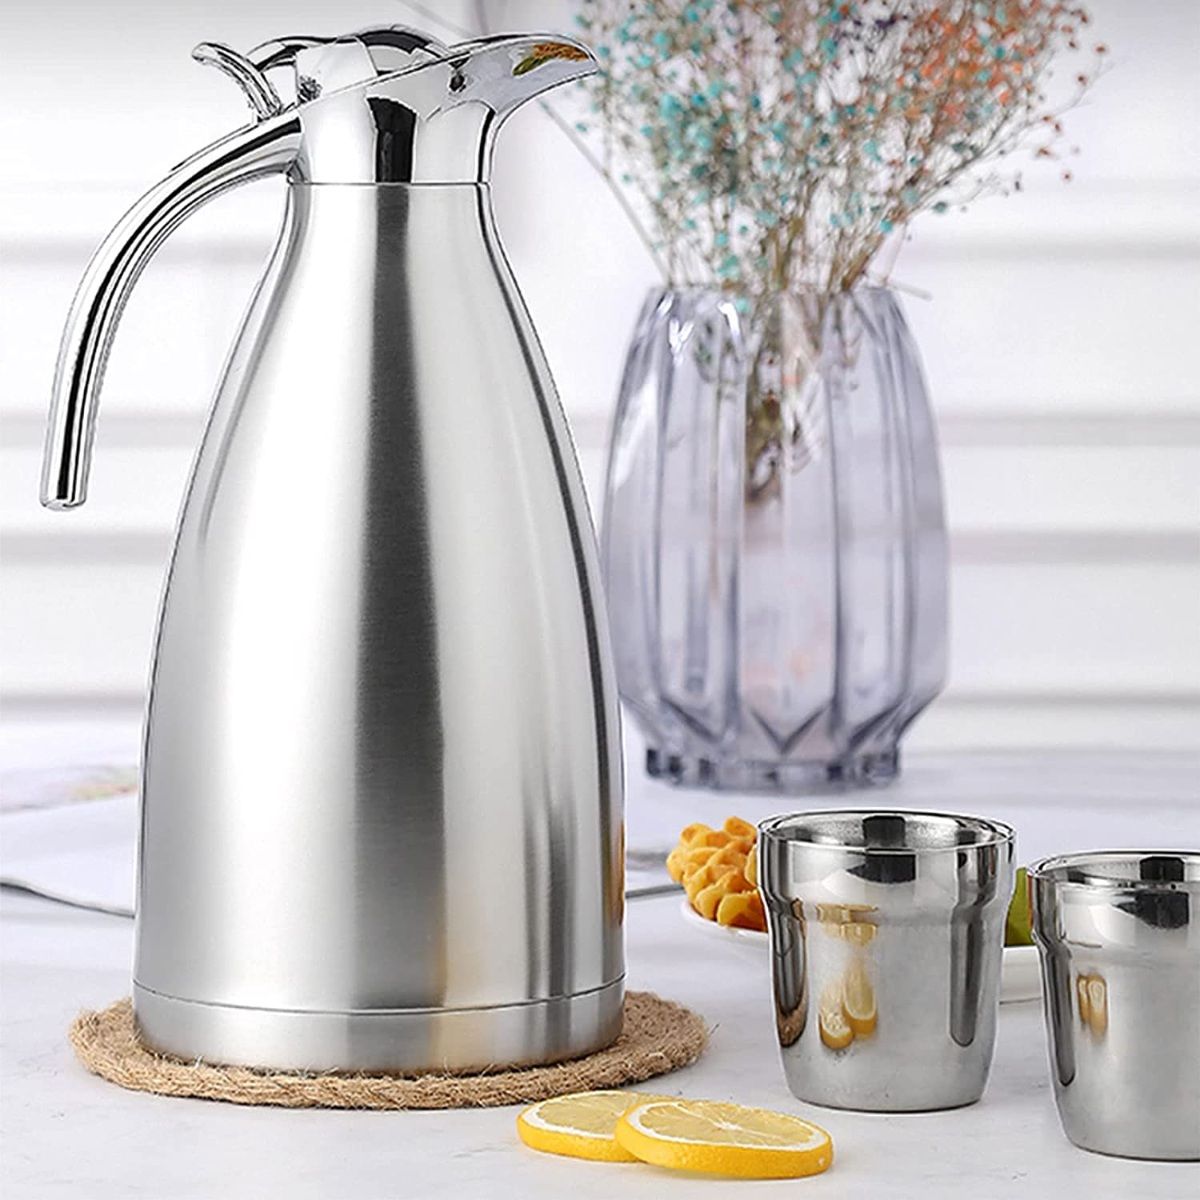 TOMAKEIT Stainless Steel Coffee Thermal Carafe 20 Hour Heat&Cold Retention 1.5 Litre/50 Oz Double Walled Vacuum Insualted Carafe with Handmade Rattan Body 